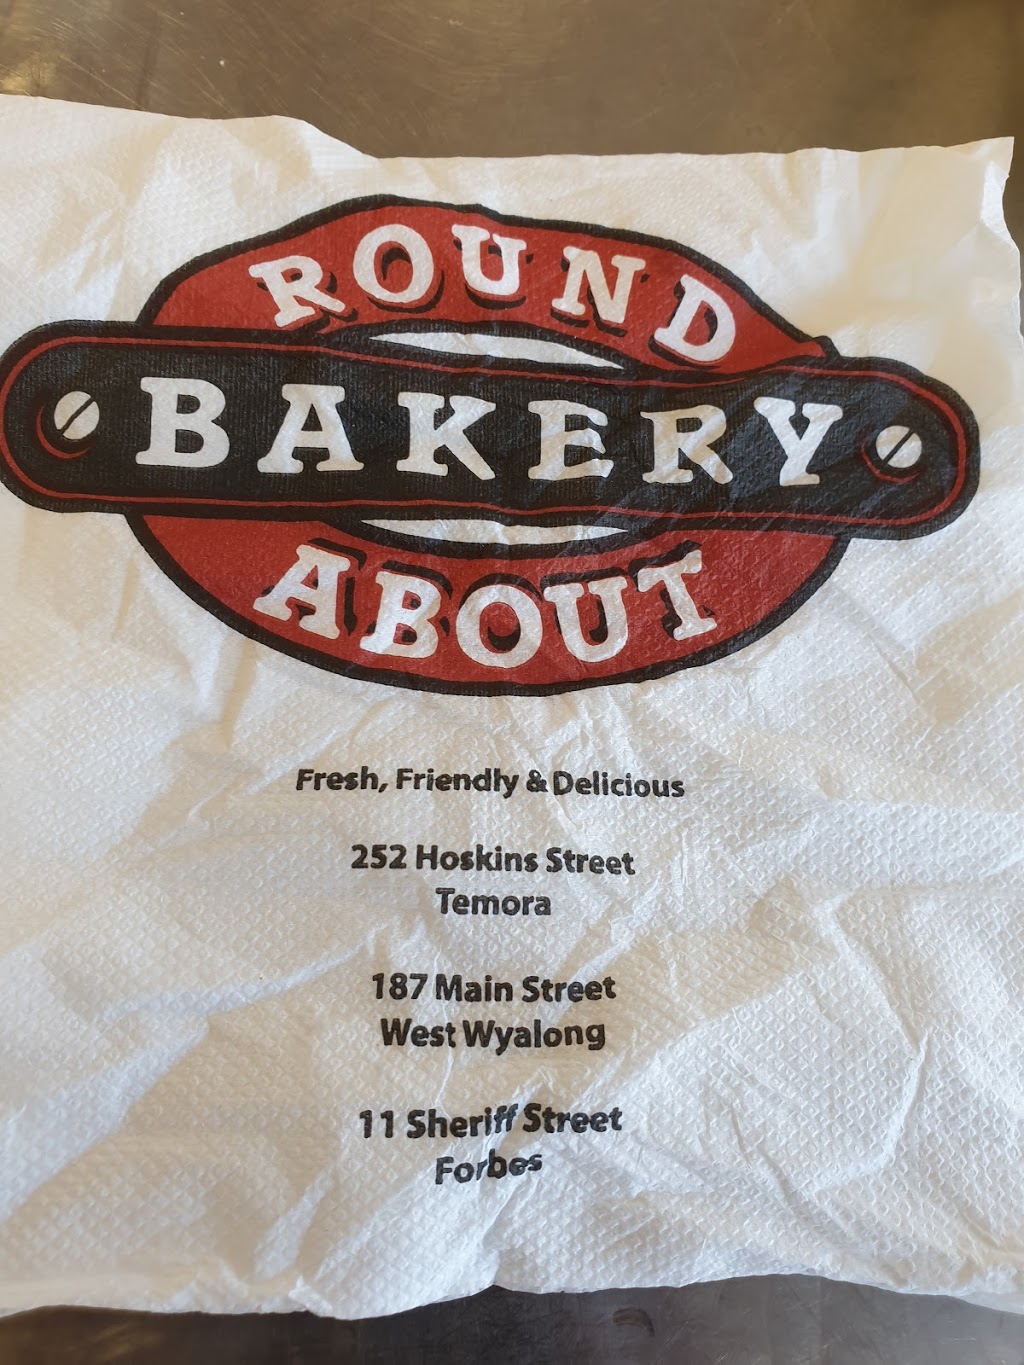 Roundabout Bakery | bakery | Court St, Forbes NSW 2871, Australia | 0268523257 OR +61 2 6852 3257